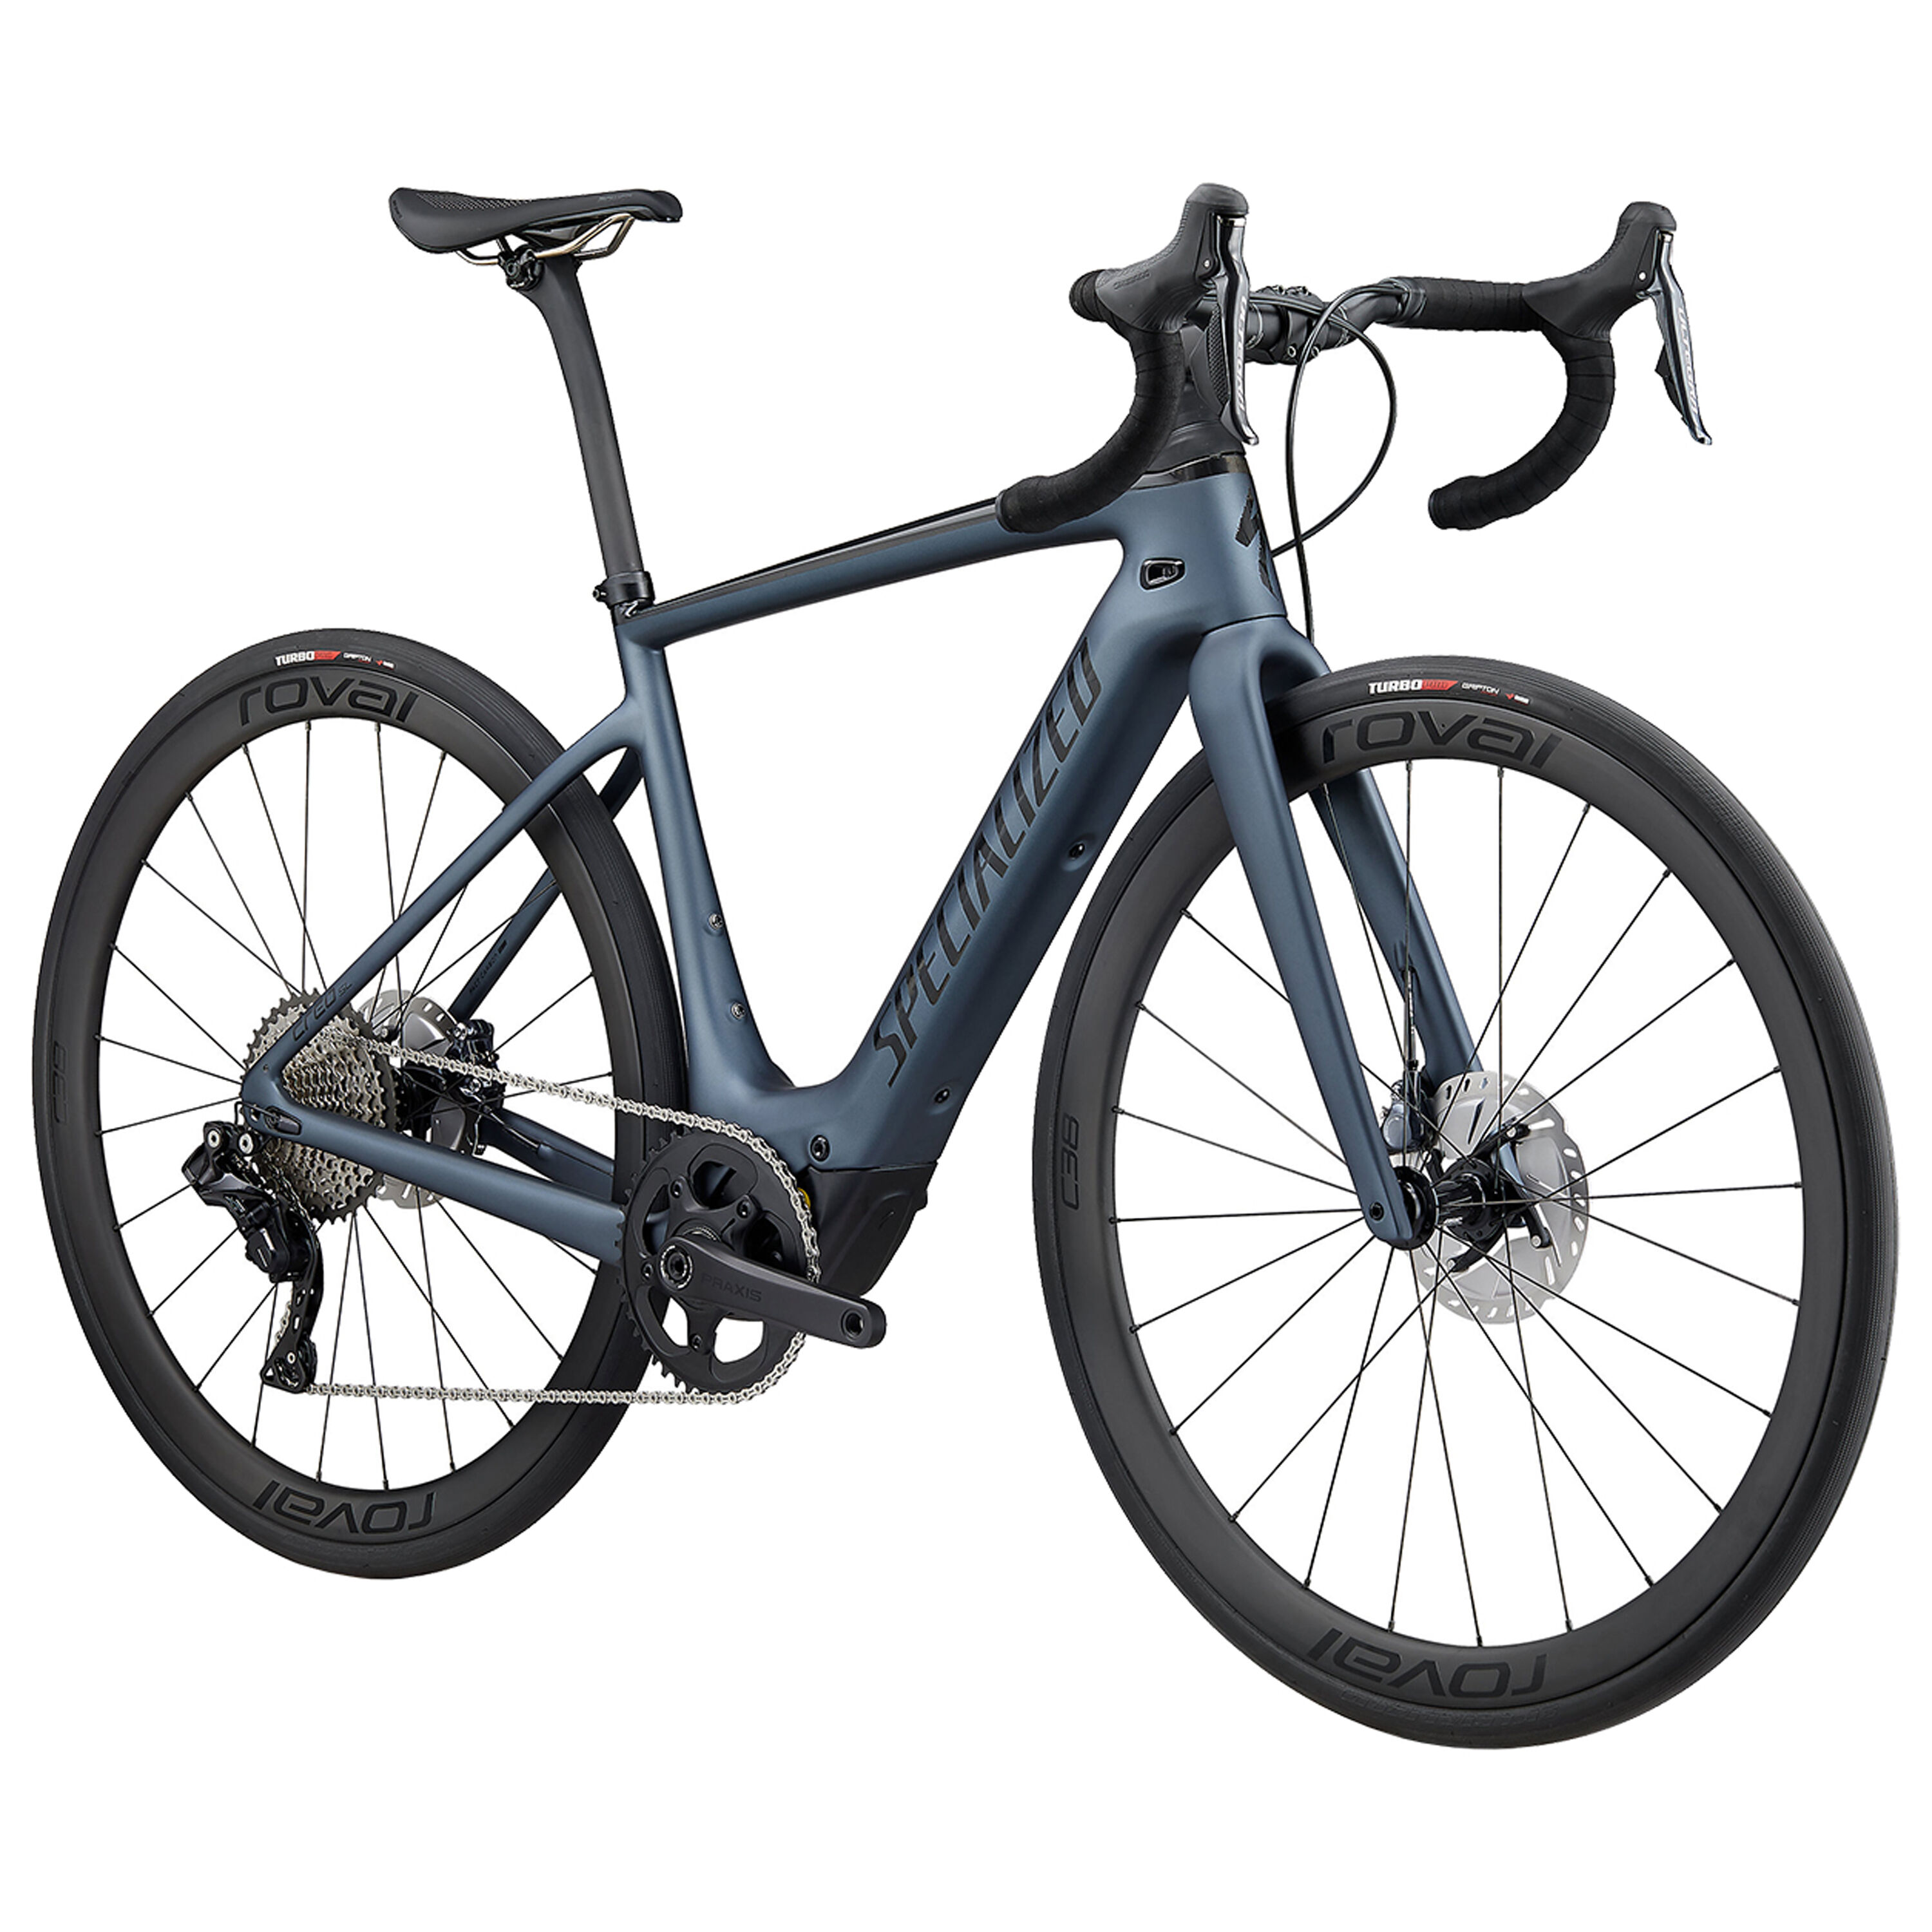 Specialized Turbo Creo SL Expert Carbon LordGun online bike store